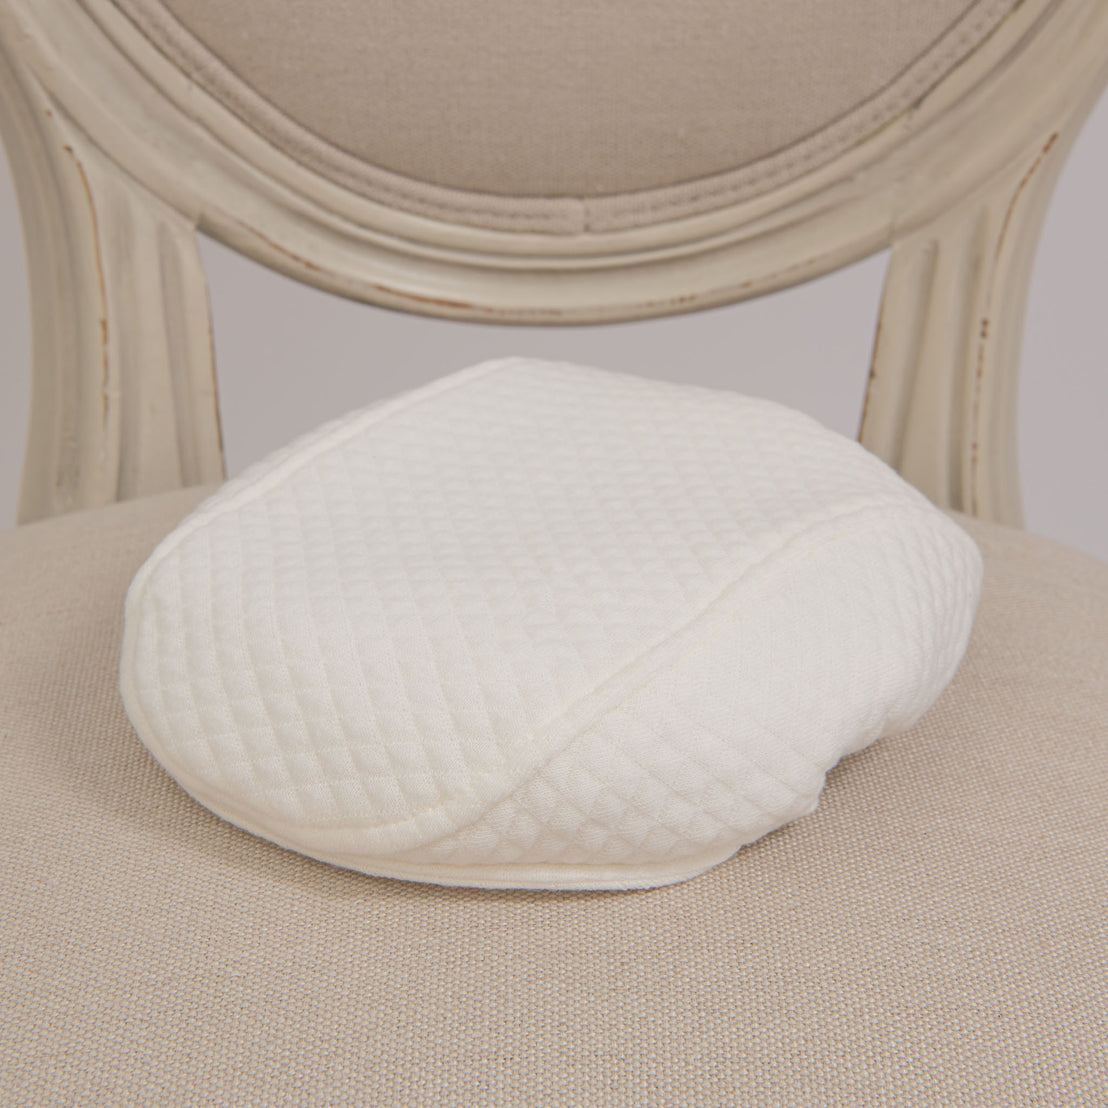 Flat lay photo of the Cotton Newsboy Cap on a chair. The hat is made with ivory quilted cotton